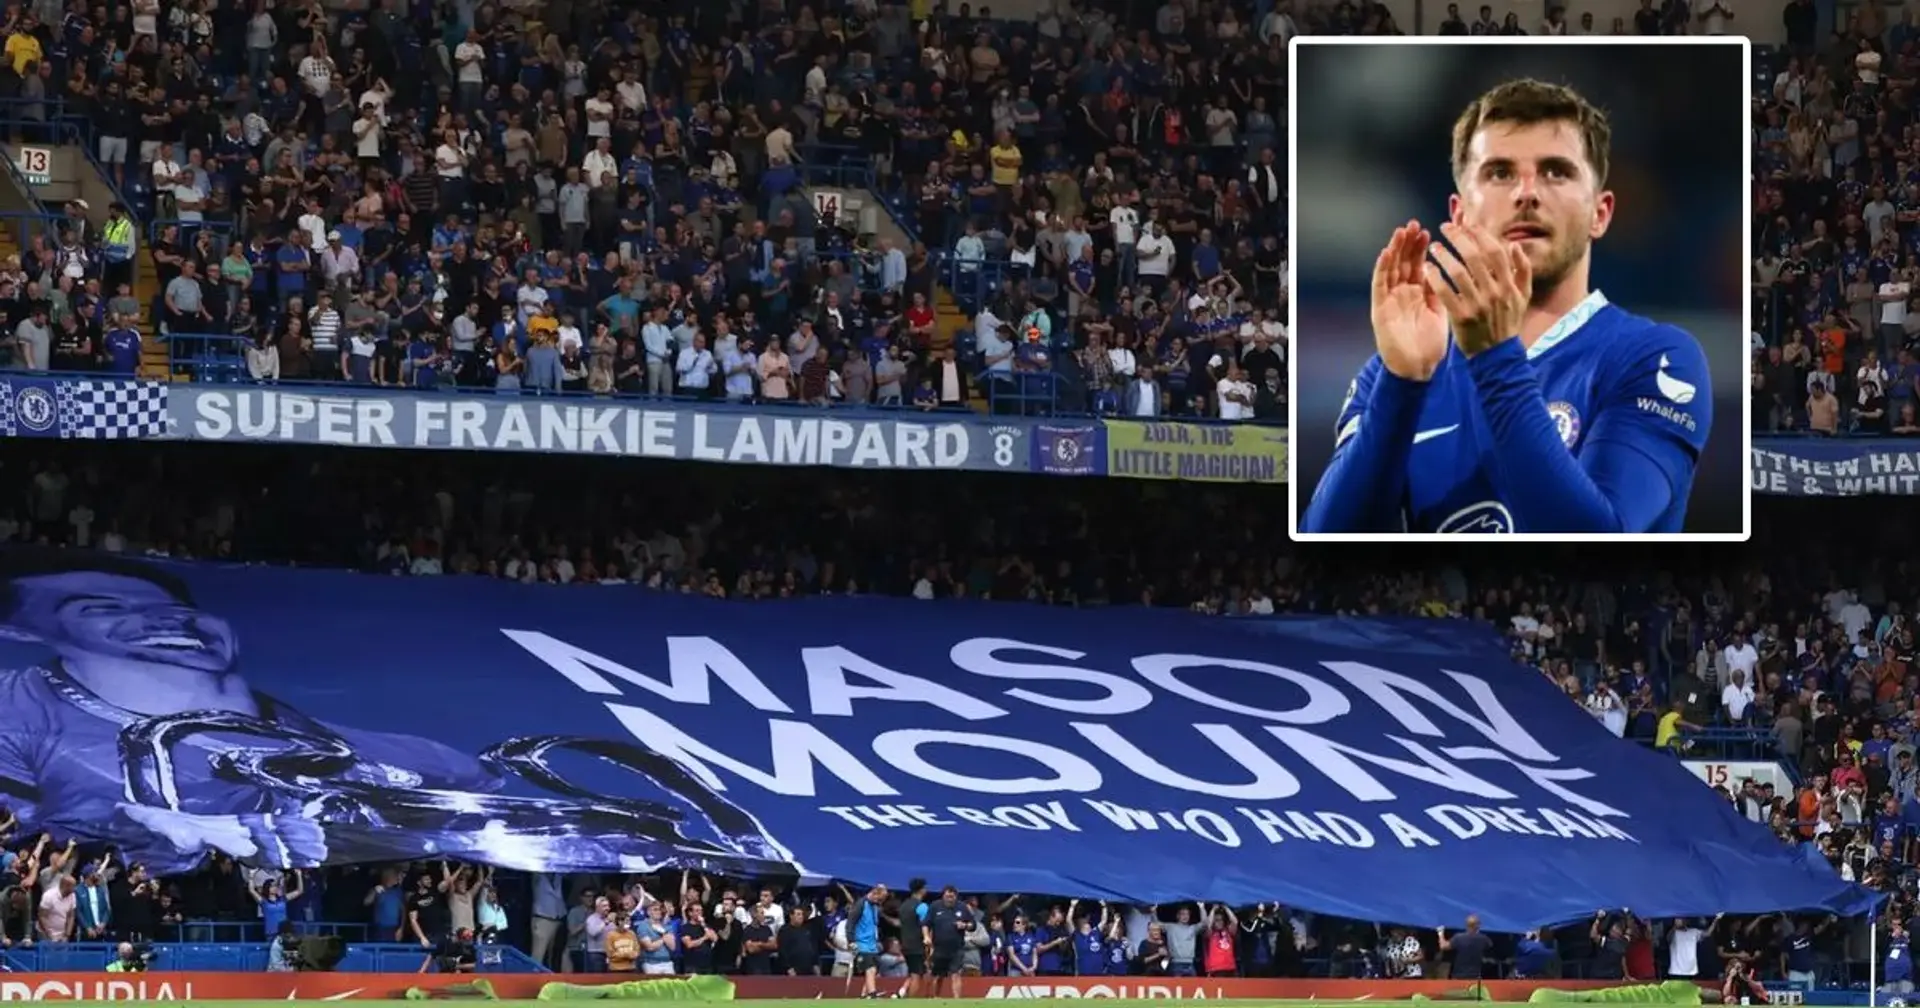 Mount preparing to say goodbye to Stamford Bridge supporters on Sunday (reliability: 4 stars)